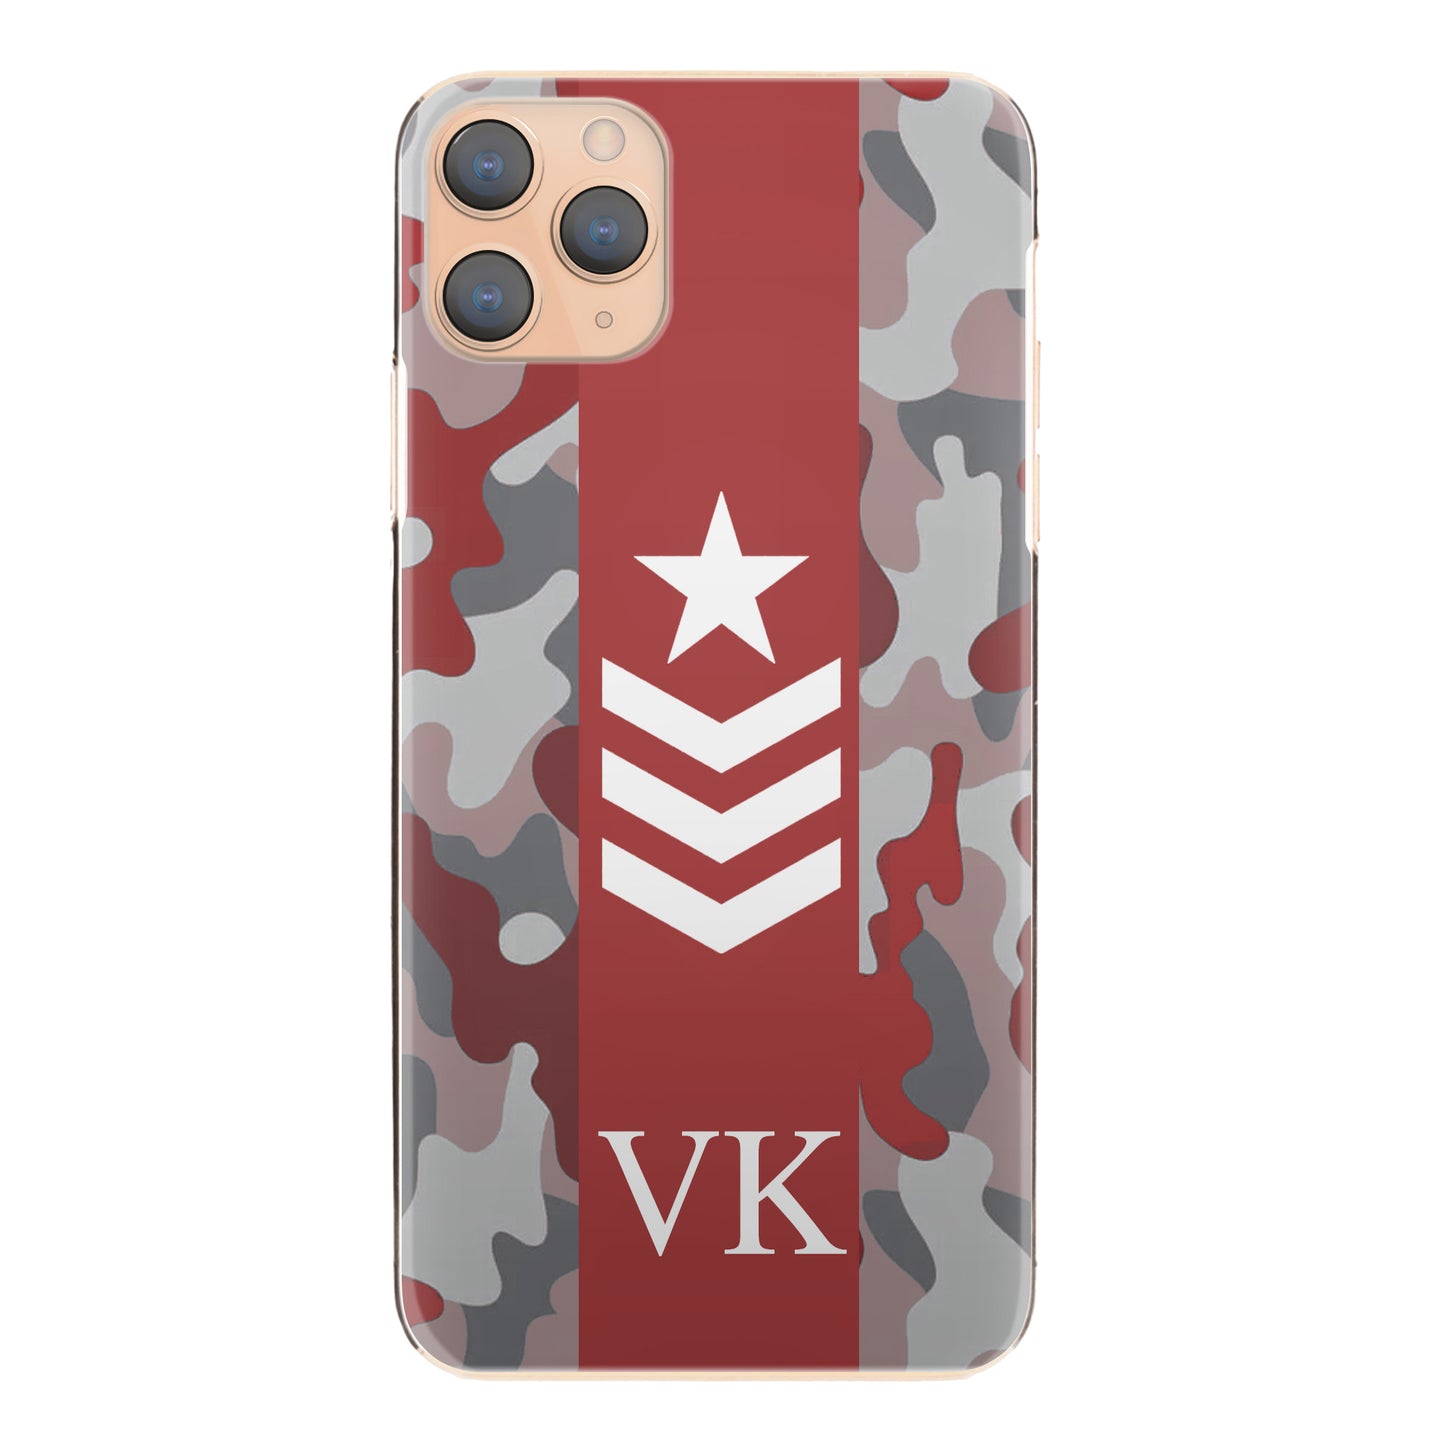 Personalised HTC Phone Hard Case with Initials and Army Rank on Red Camo